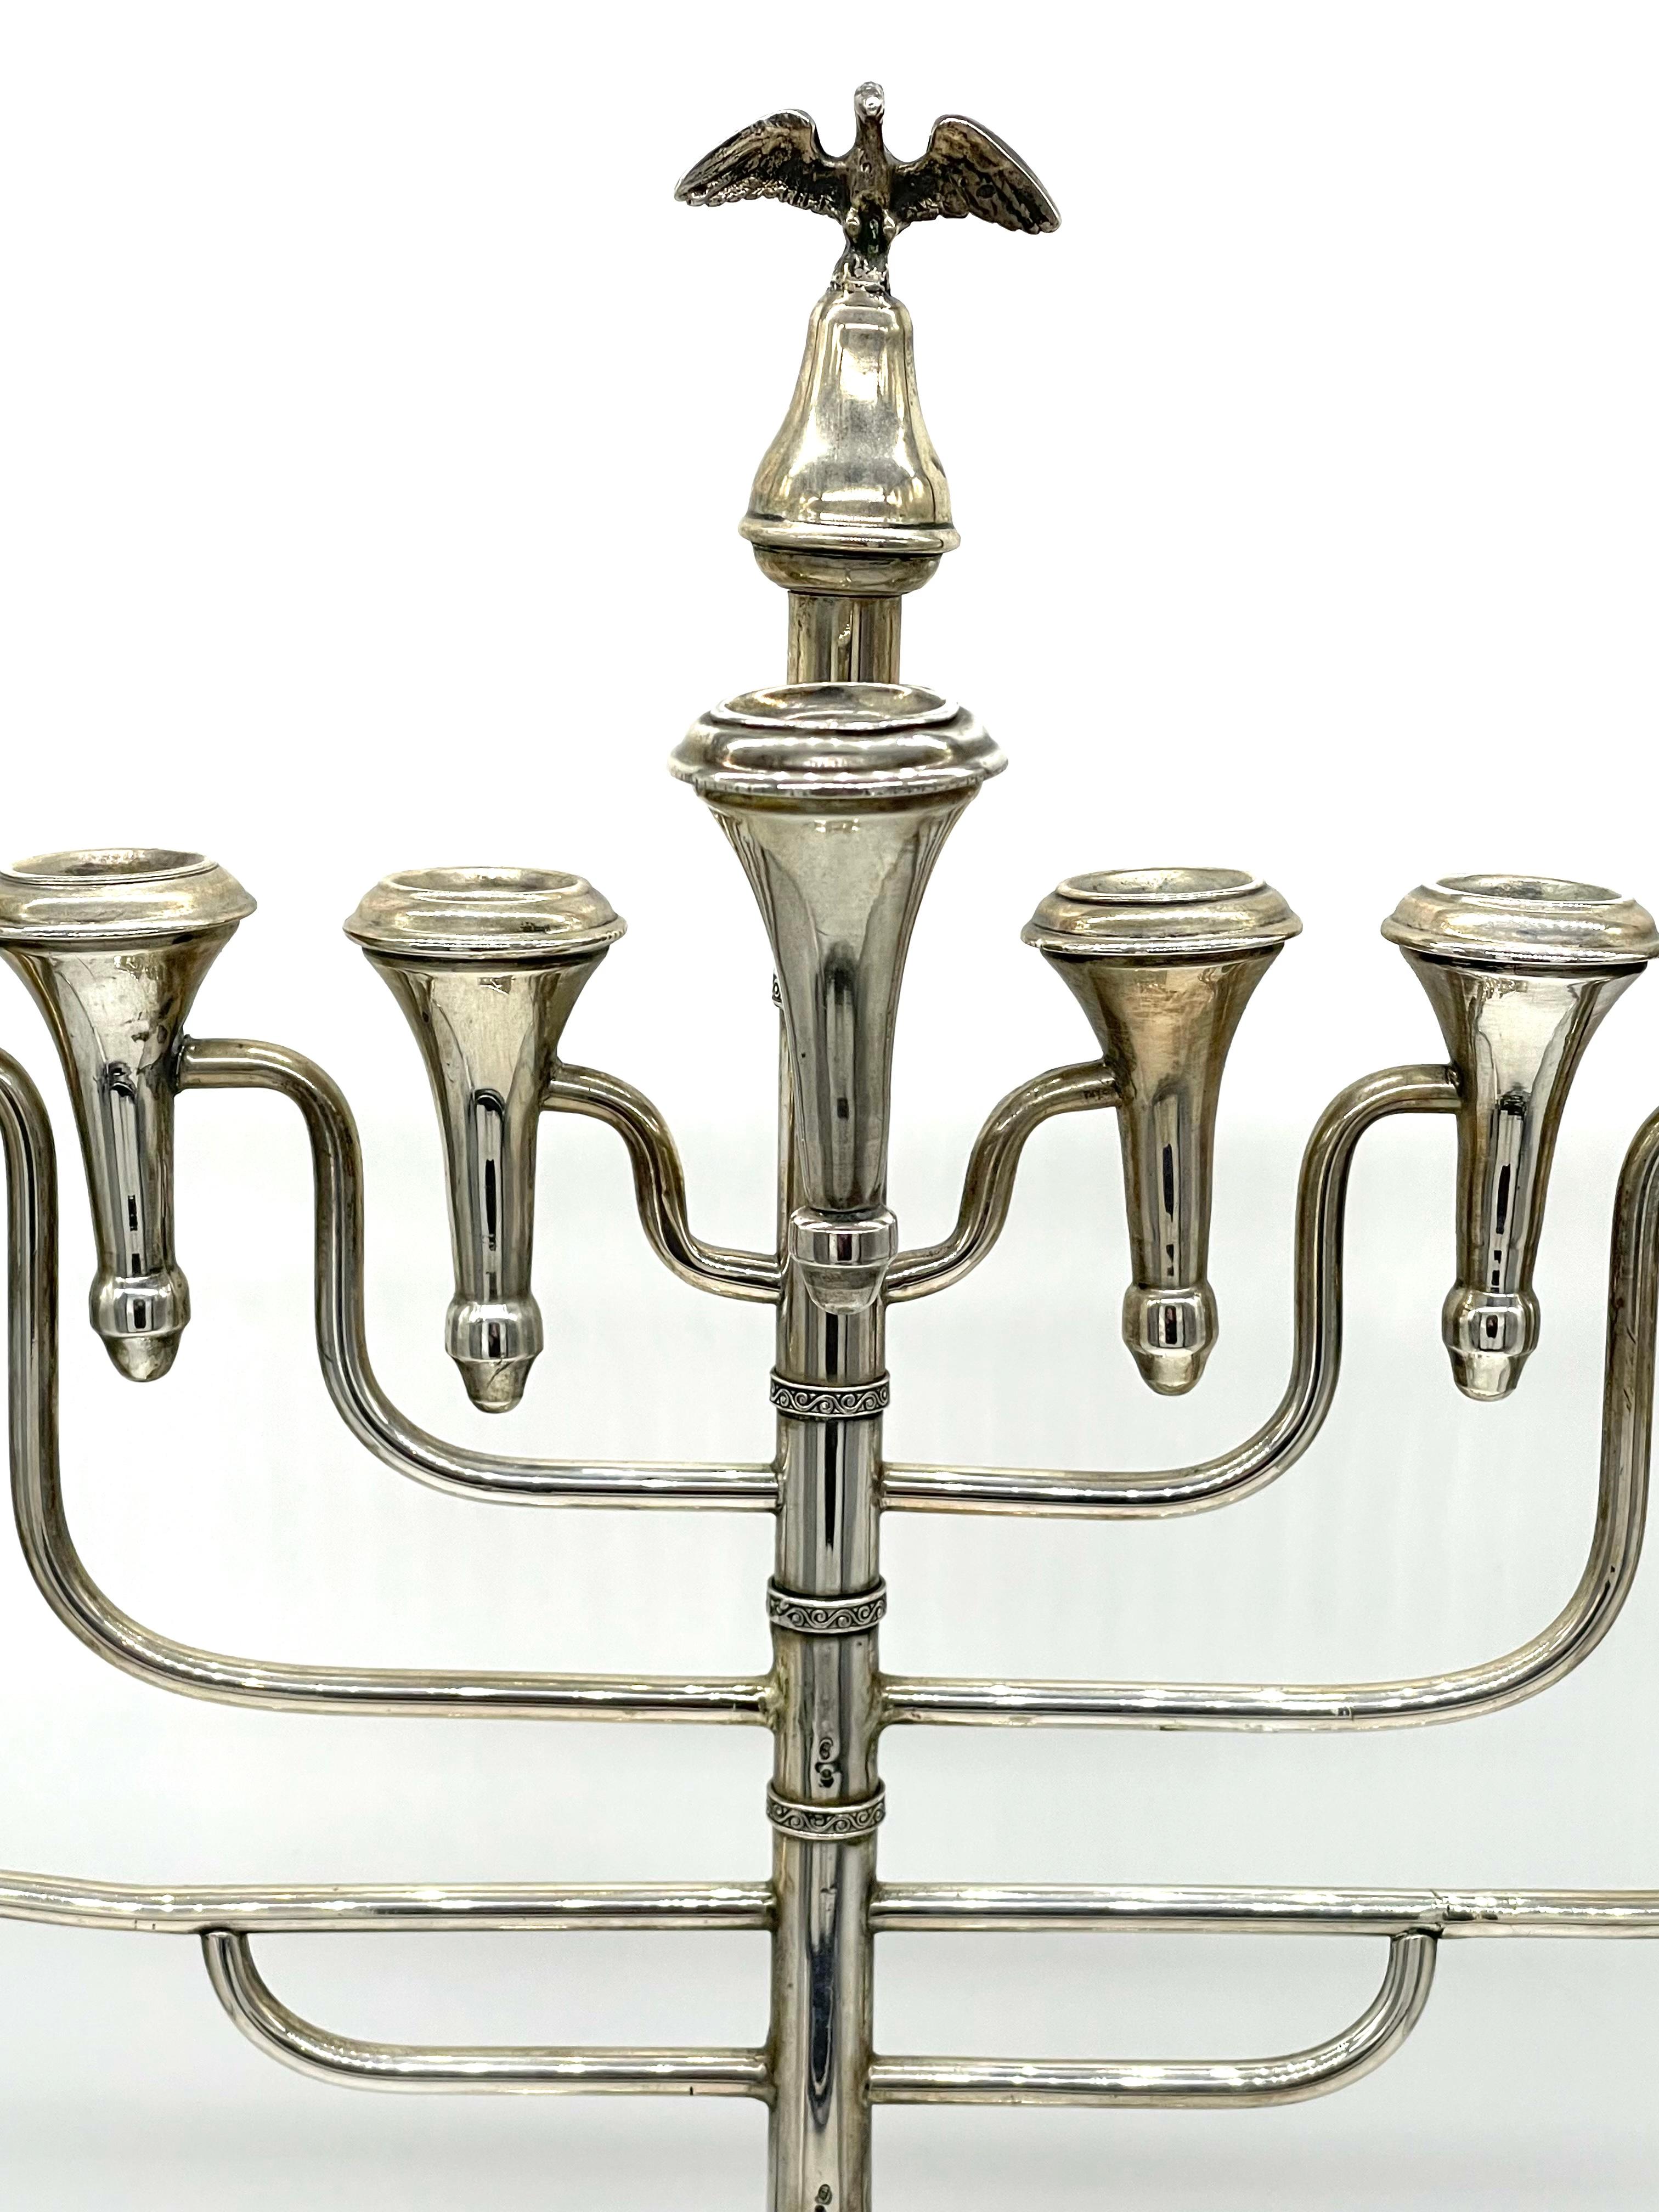 Early 20th century monumental, silver Hanukkah lamp made in Poland. Designed in an Art-Deco style, the lamp is decorated with floral motifs at its base, while a detailed figure of an eagle appears at the top of its central, supporting pillar,